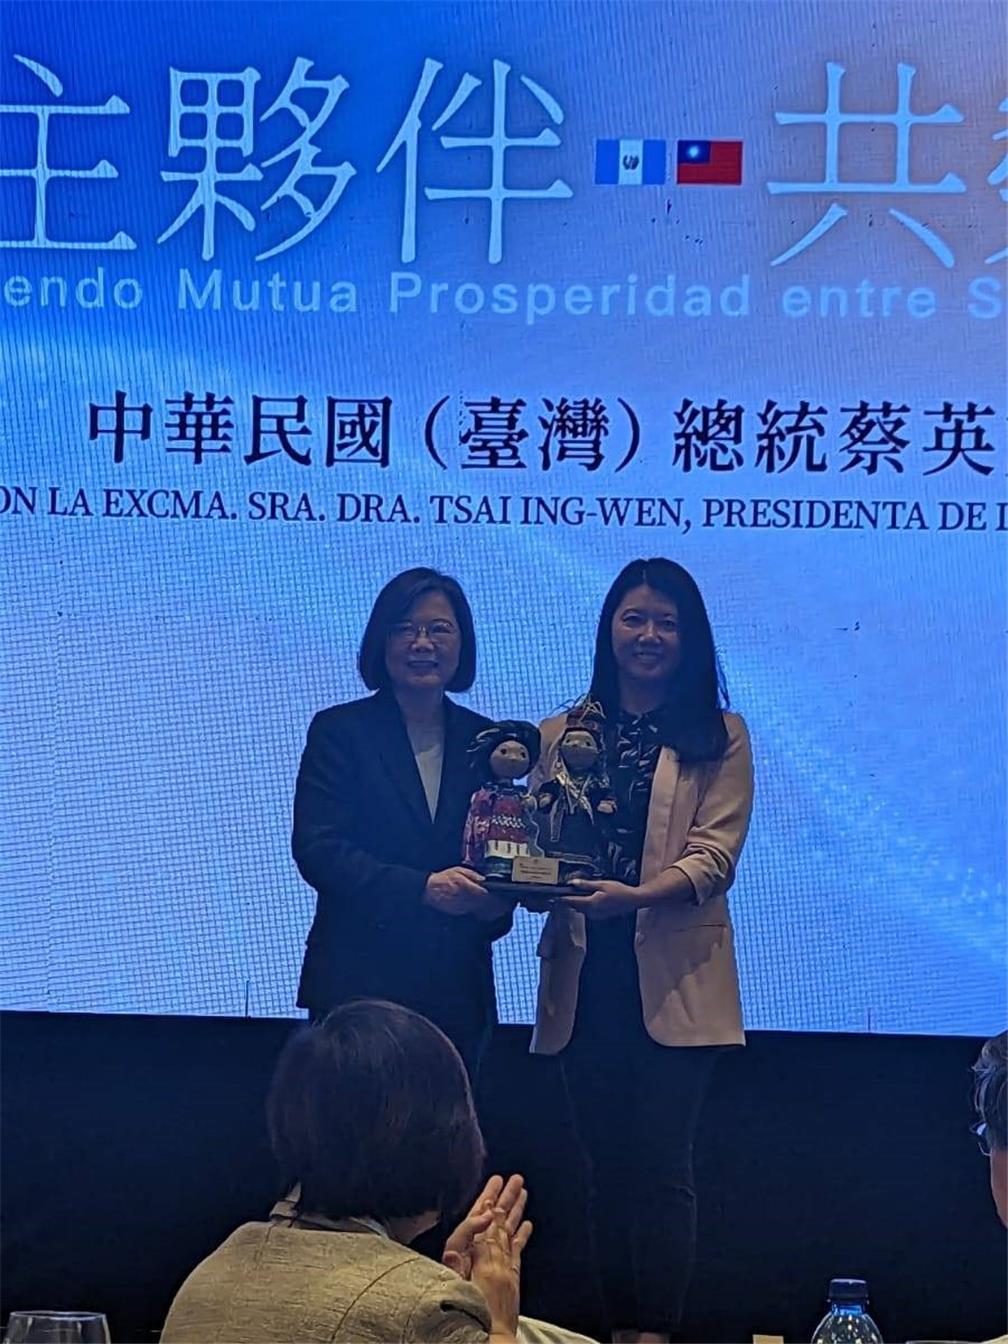 President Tsai Ing-Wen receiving distinctive dolls symbolizing Taiwanese Paiwan and Maya cultures, specially crafted by Chia Ying Tsai, during her visit to Guatemala in March 2023.